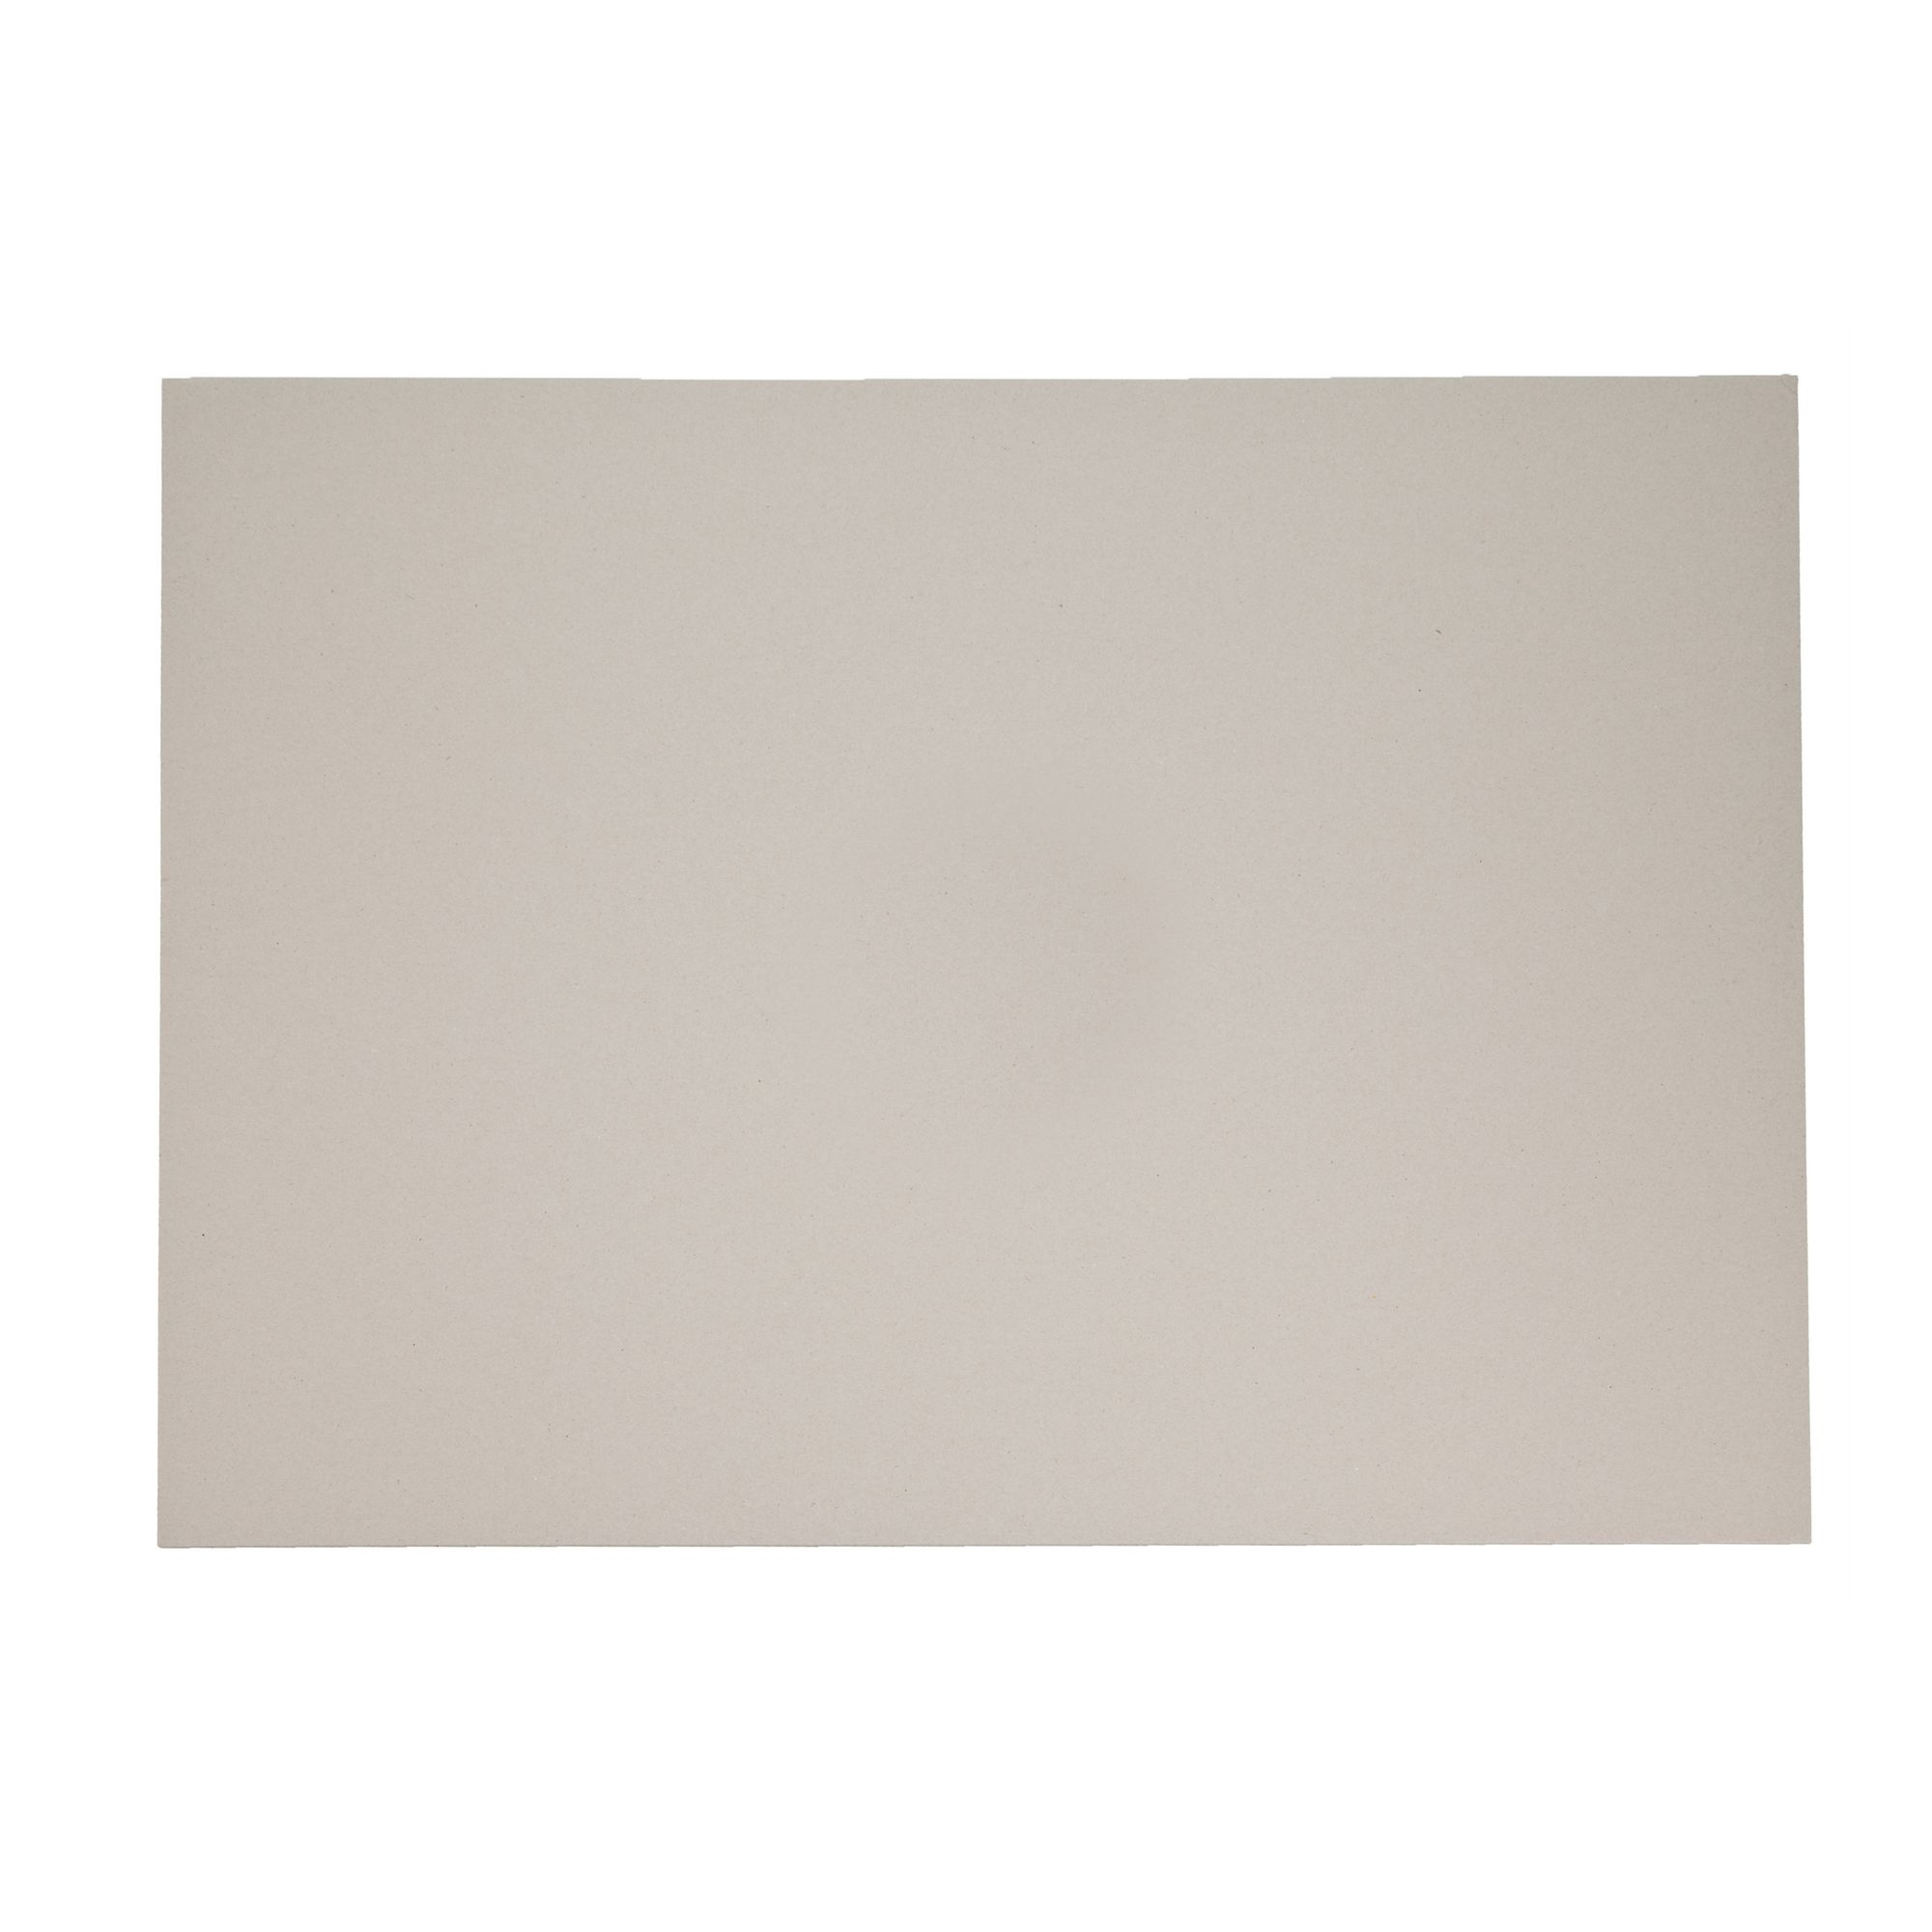 A1 Grey Chipboard - Thick